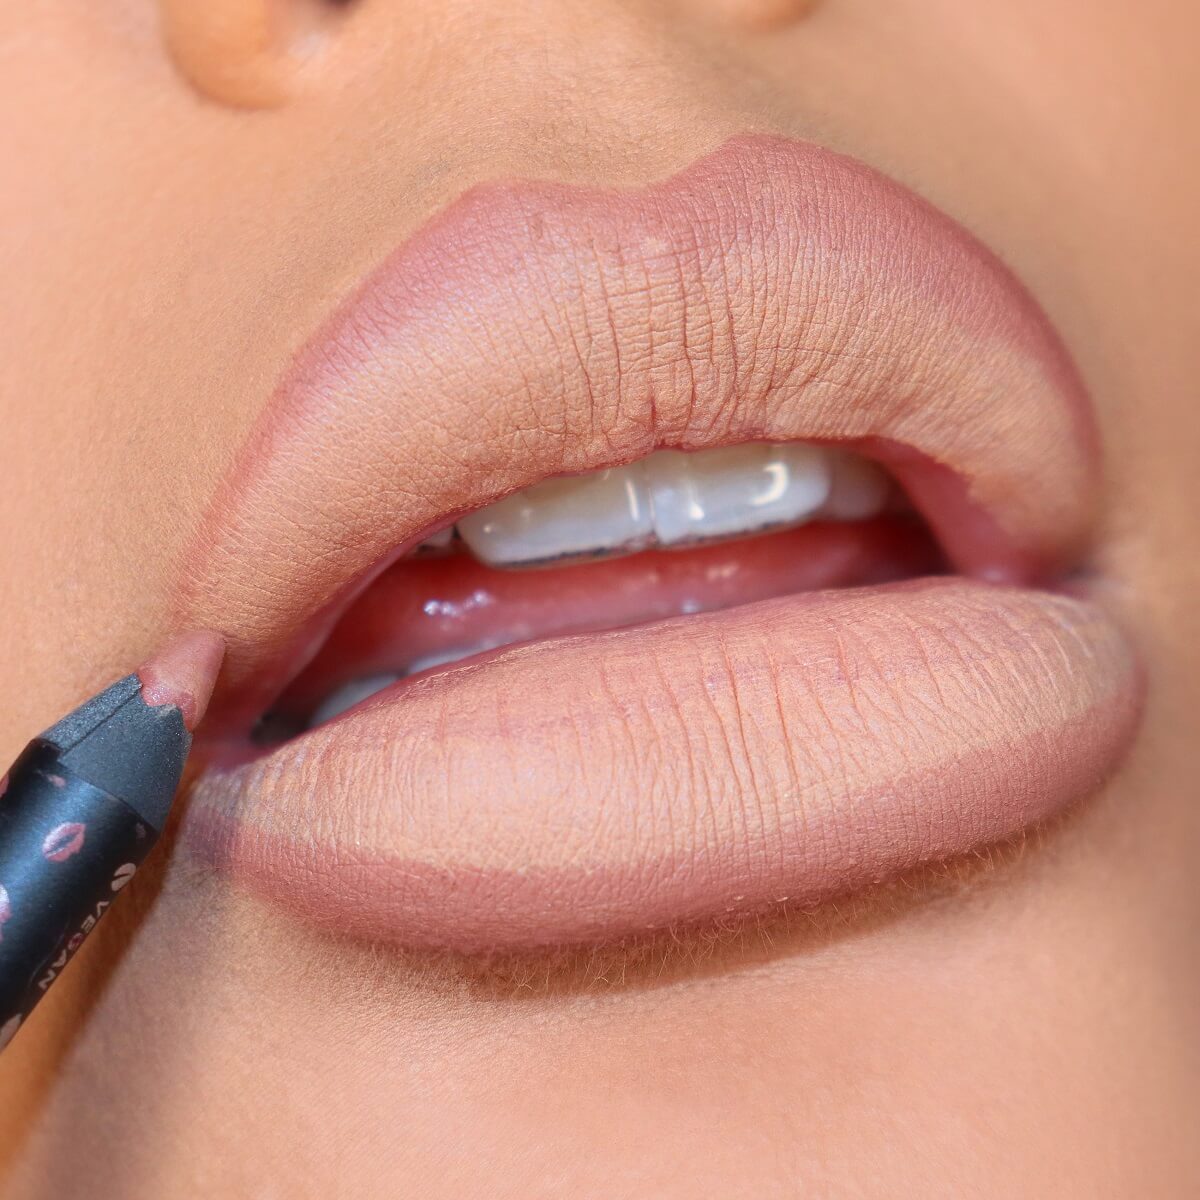 OVERLINE WITH A LIP PENCIL